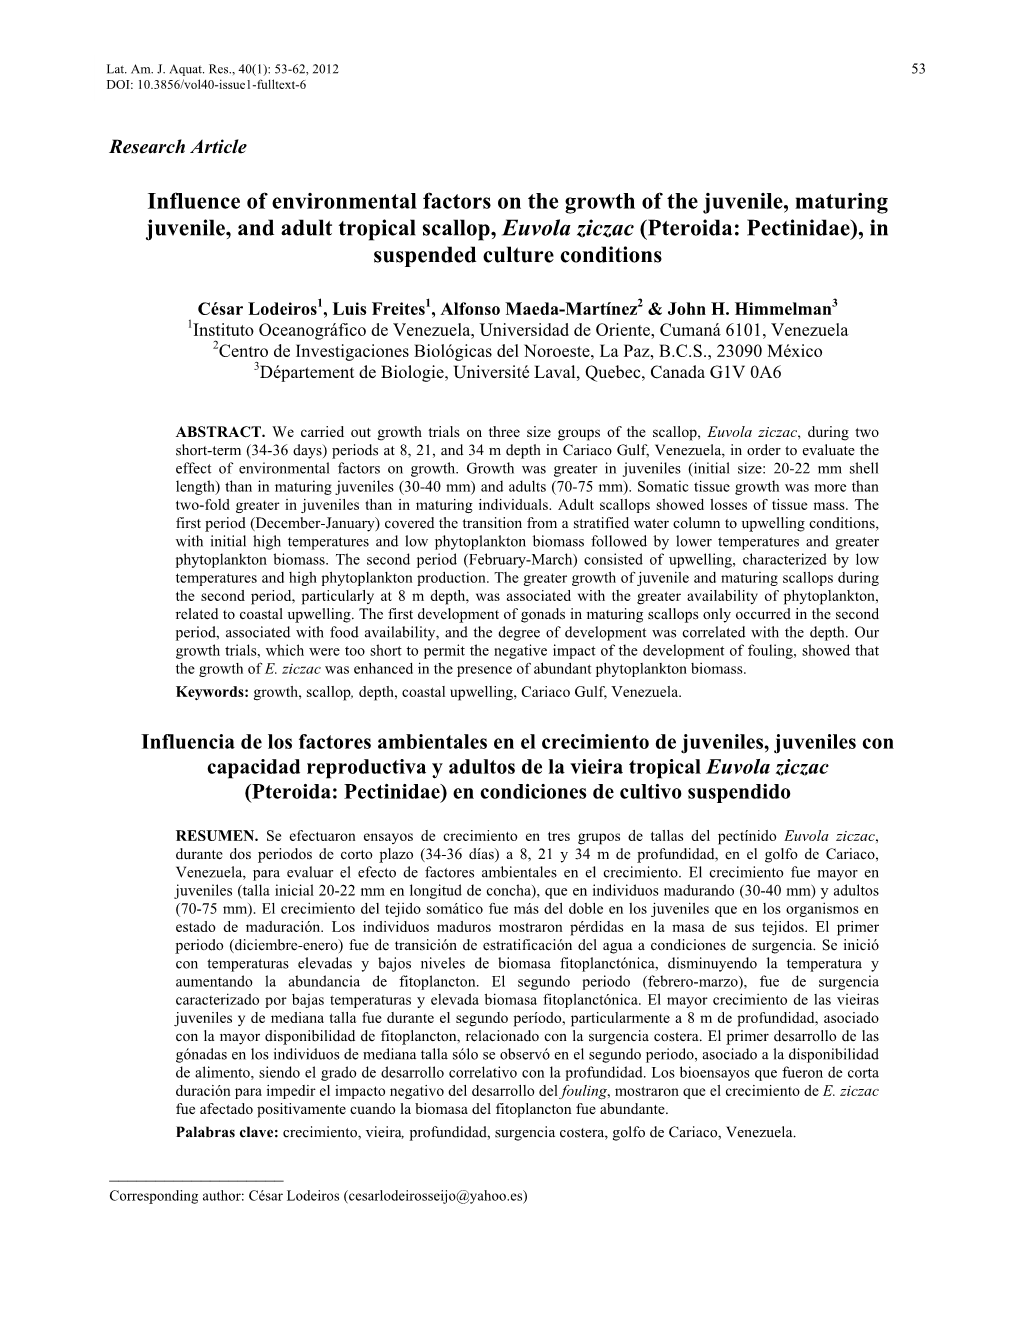 Influence of Environmental Factors on the Growth of the Juvenile, Maturing